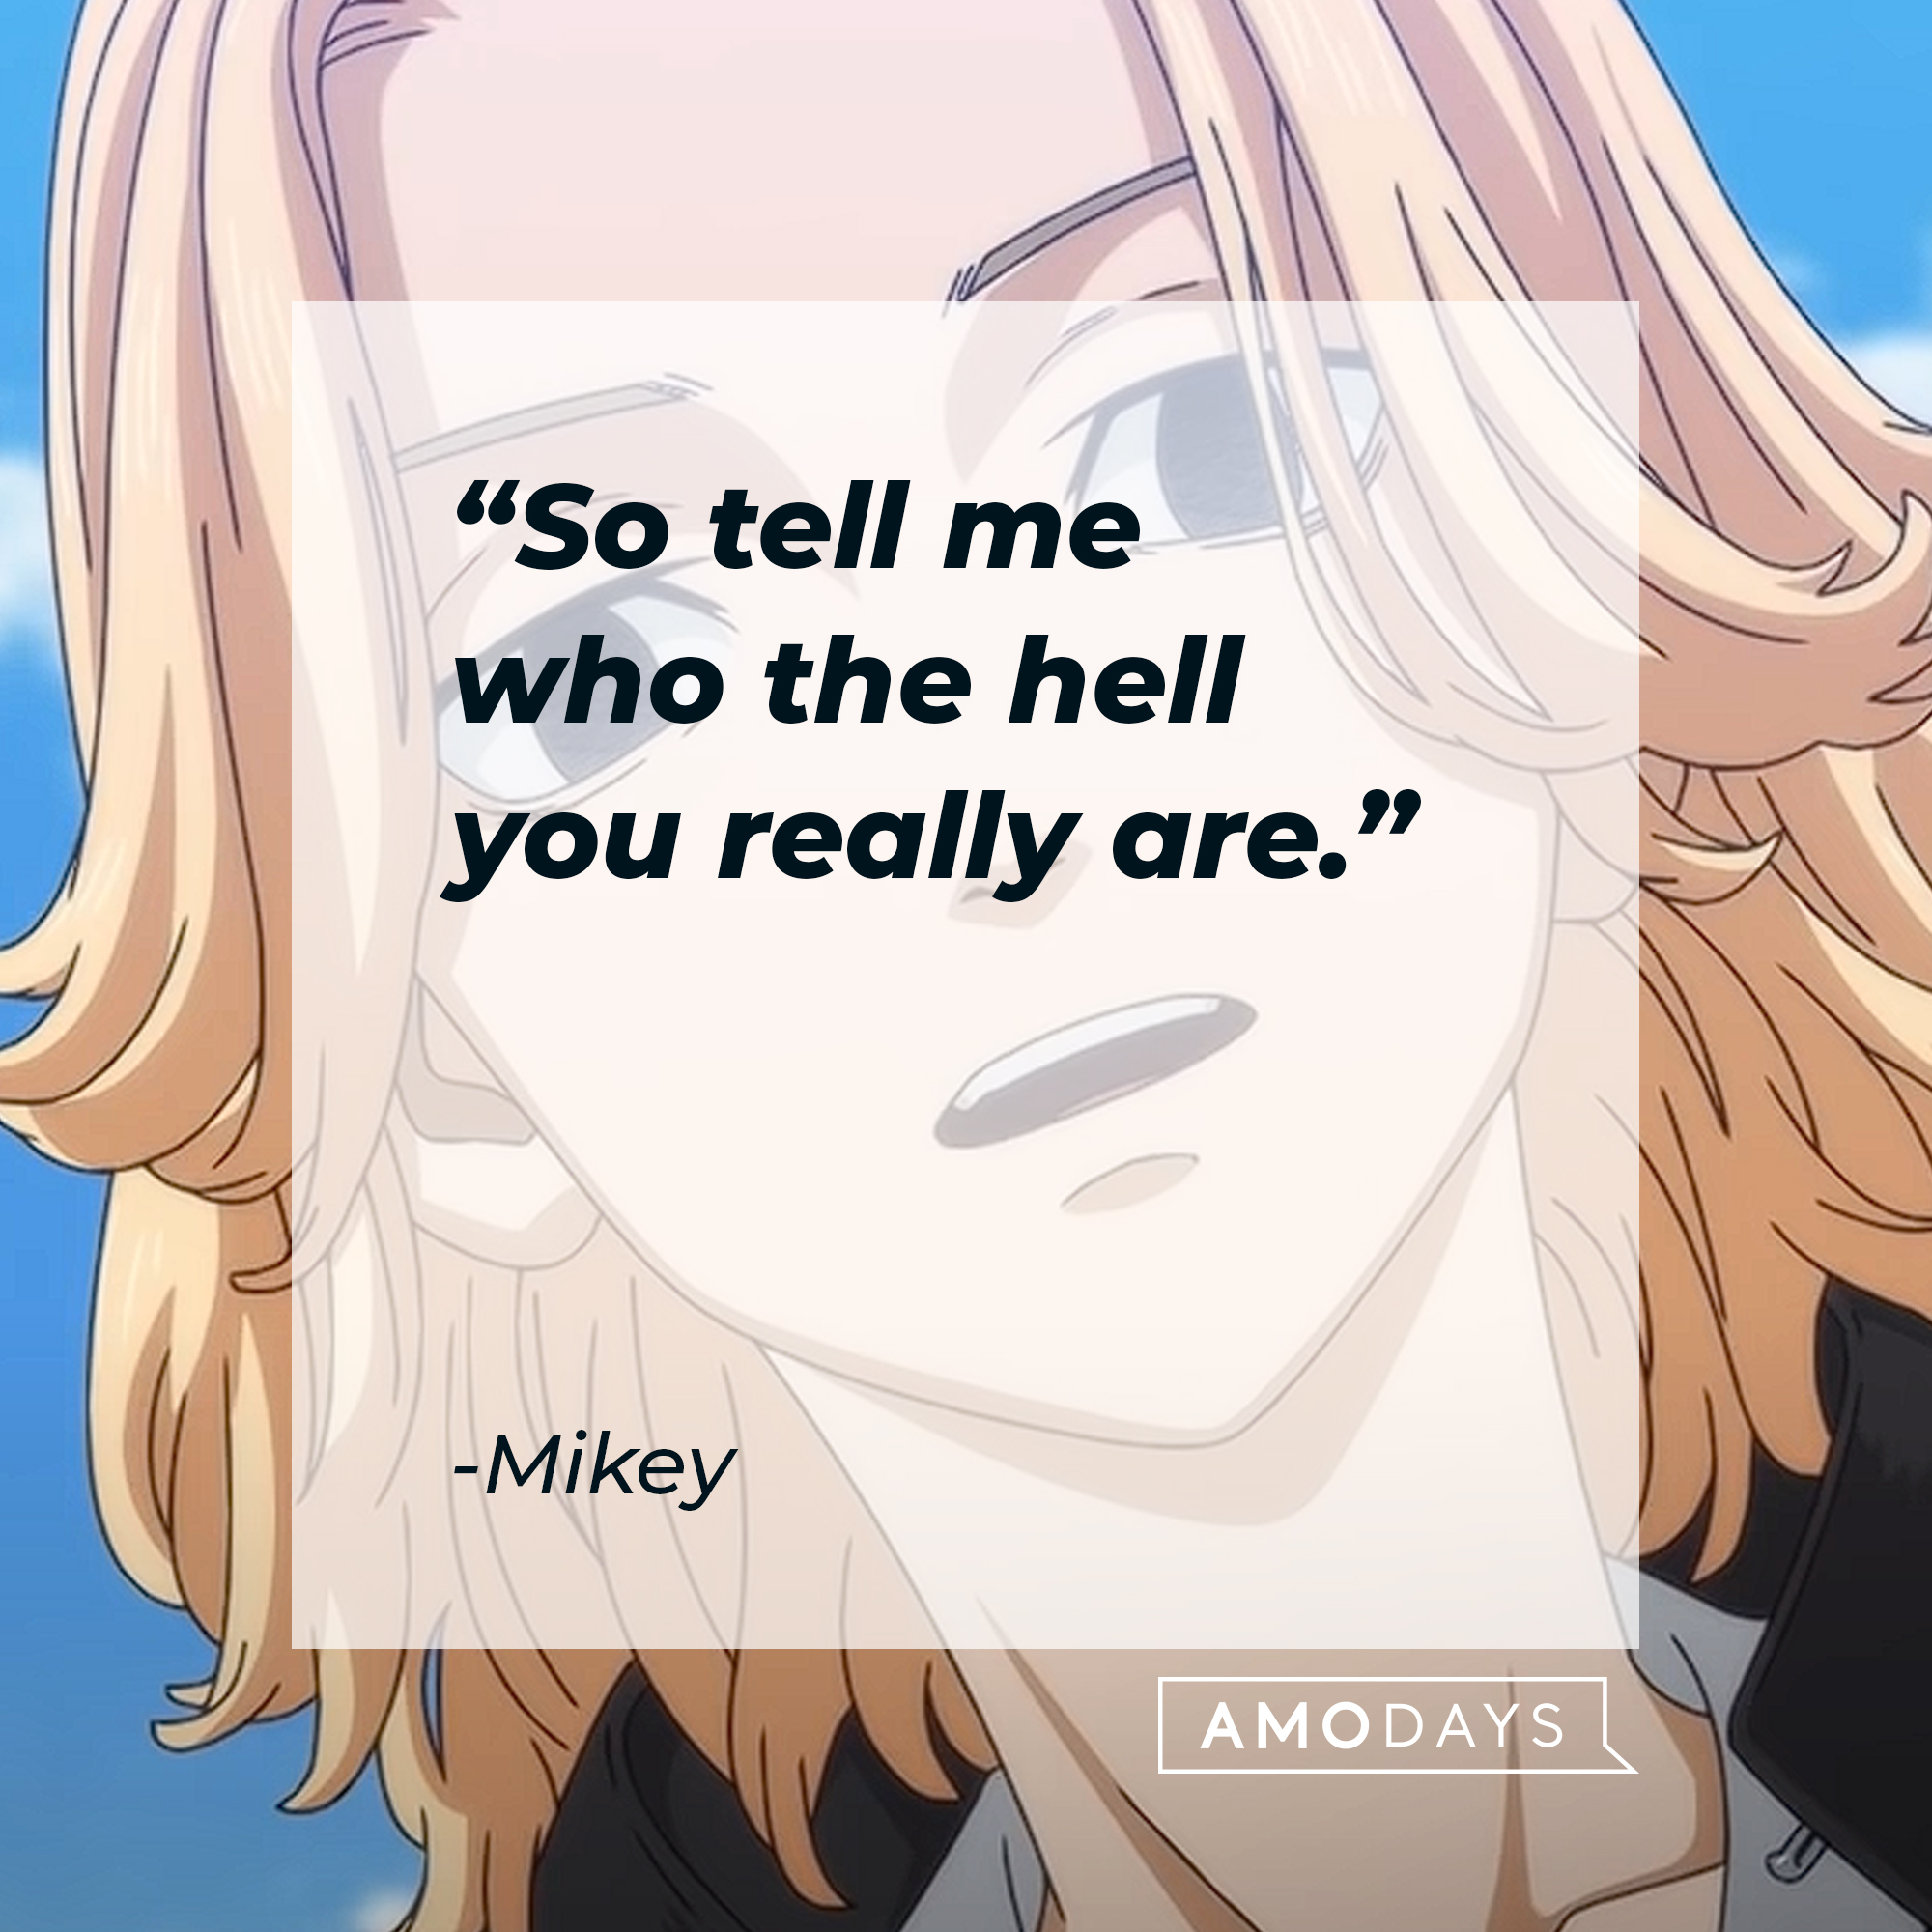 An image of Mikey with his quote: "So tell me who the hell you really are." | Source: youtube.com/CrunchyrollCollection